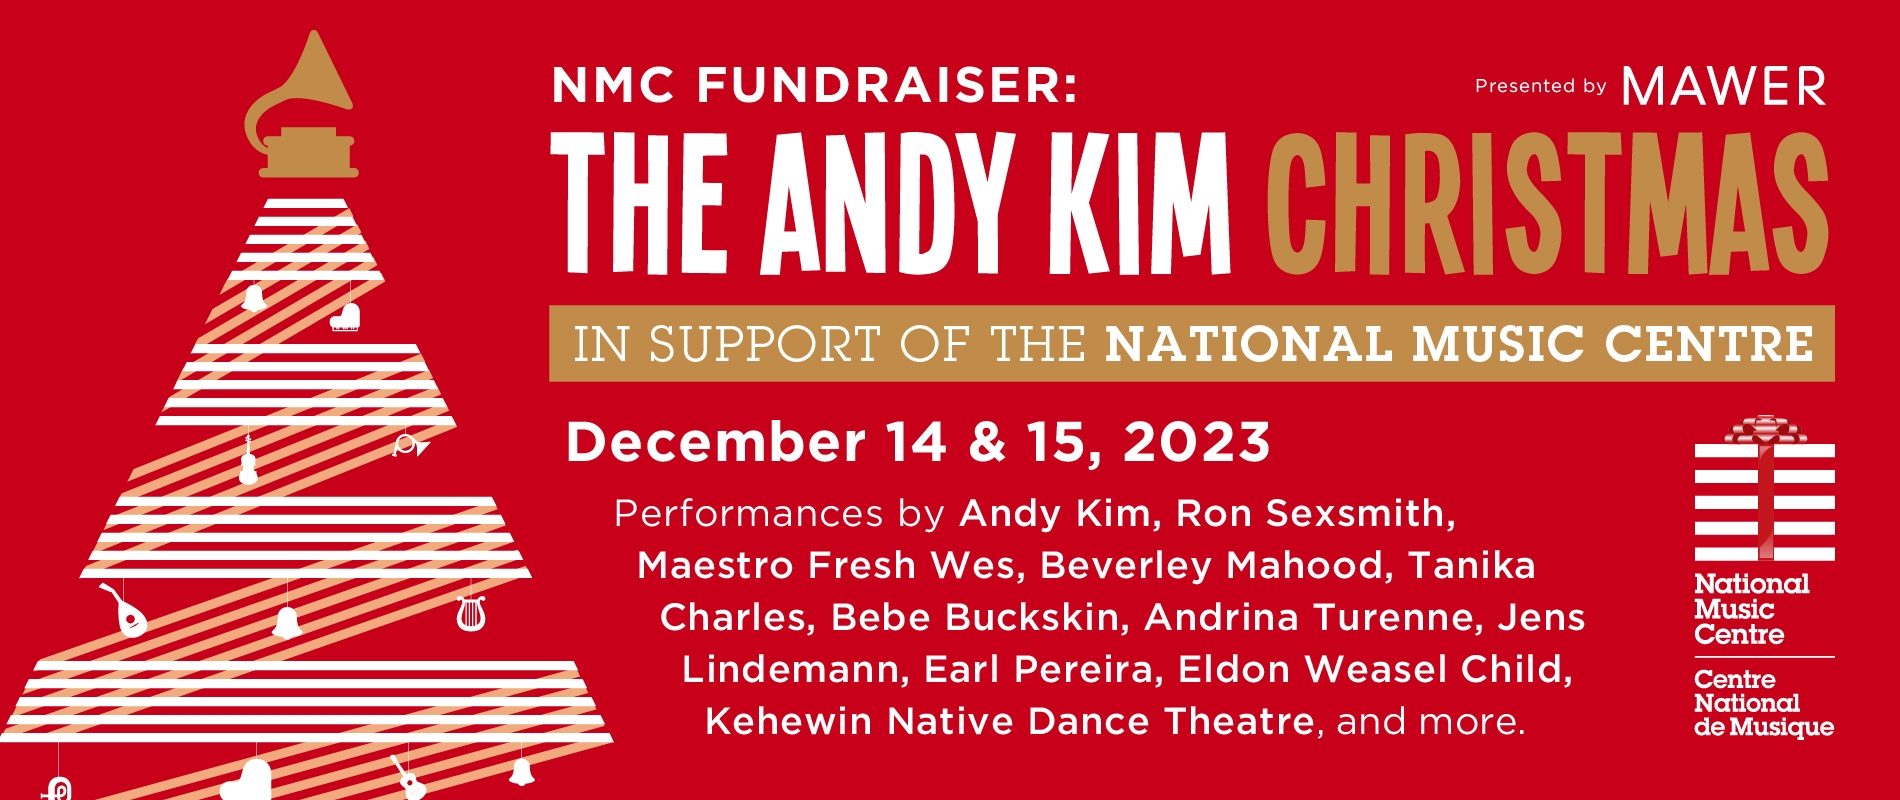 The Andy Kim Christmas in Support of National Music Centre Returns to Calgary on December 14 and 15